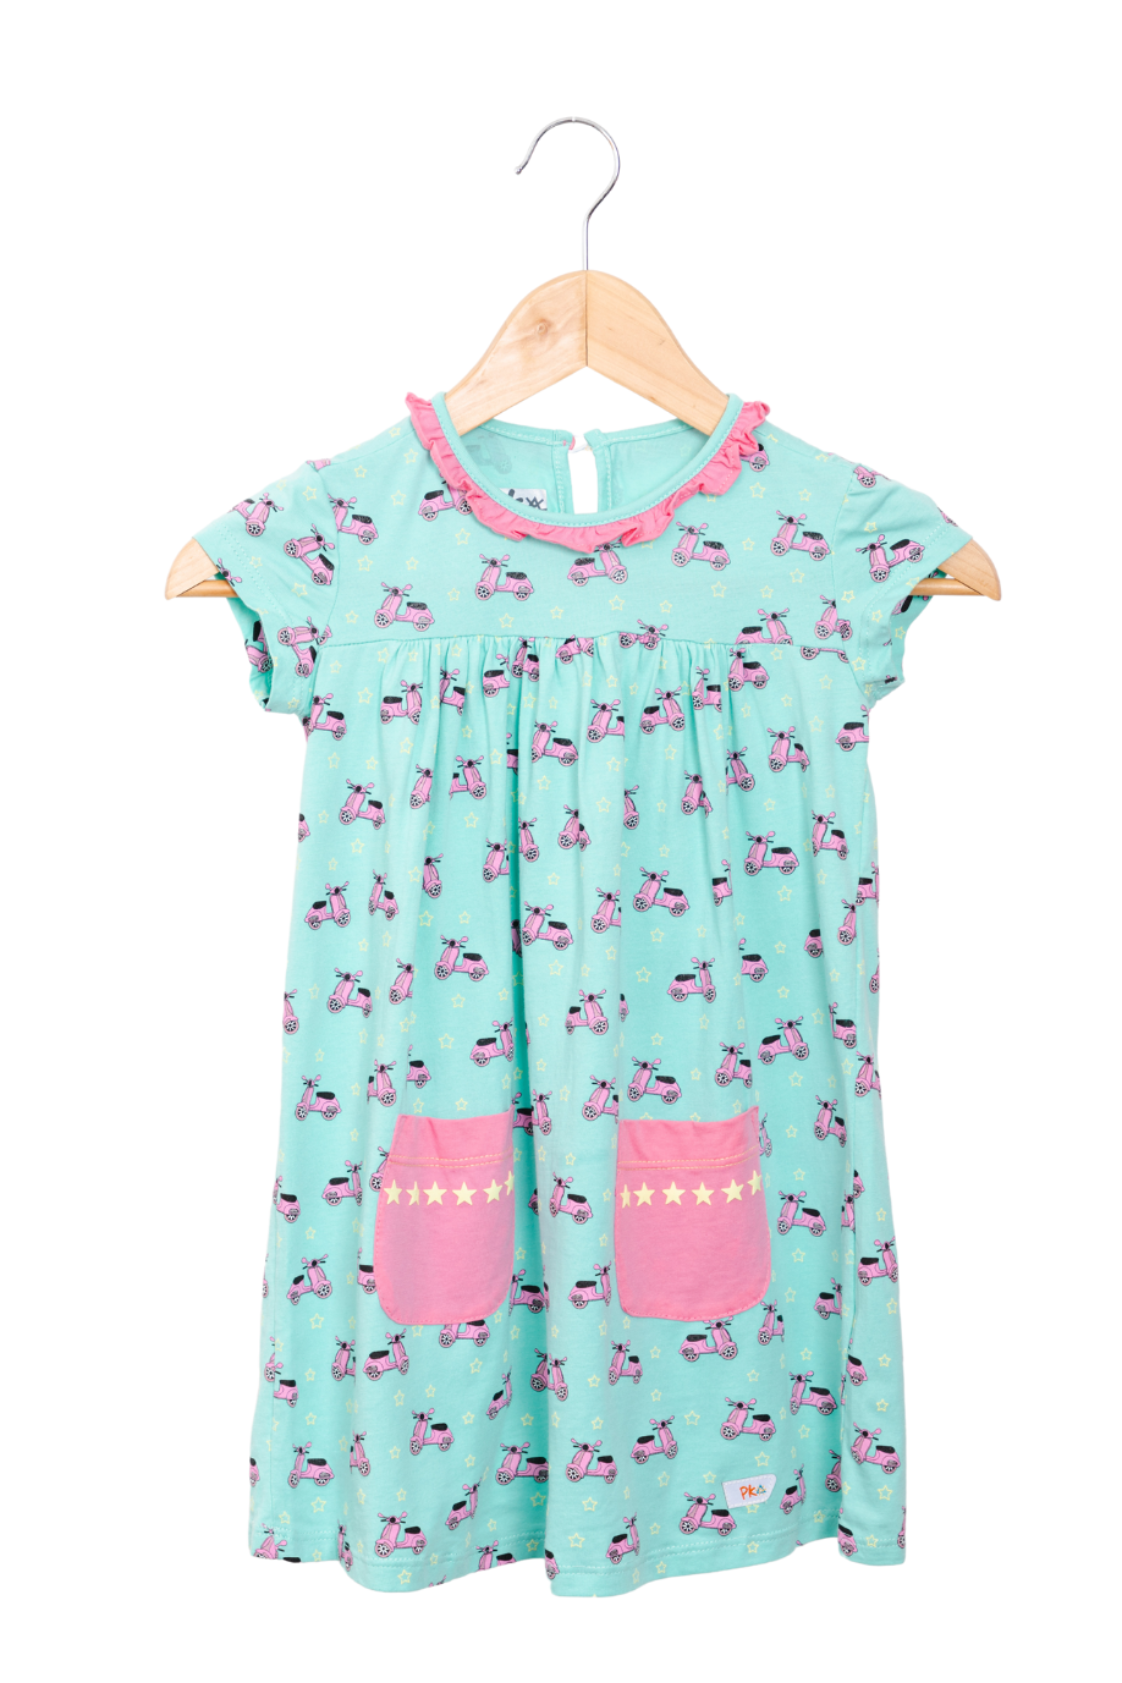 Girl dress with vespa and stars prints, made in Peruvian pima cotton, eco-friendly materials, empowering girls